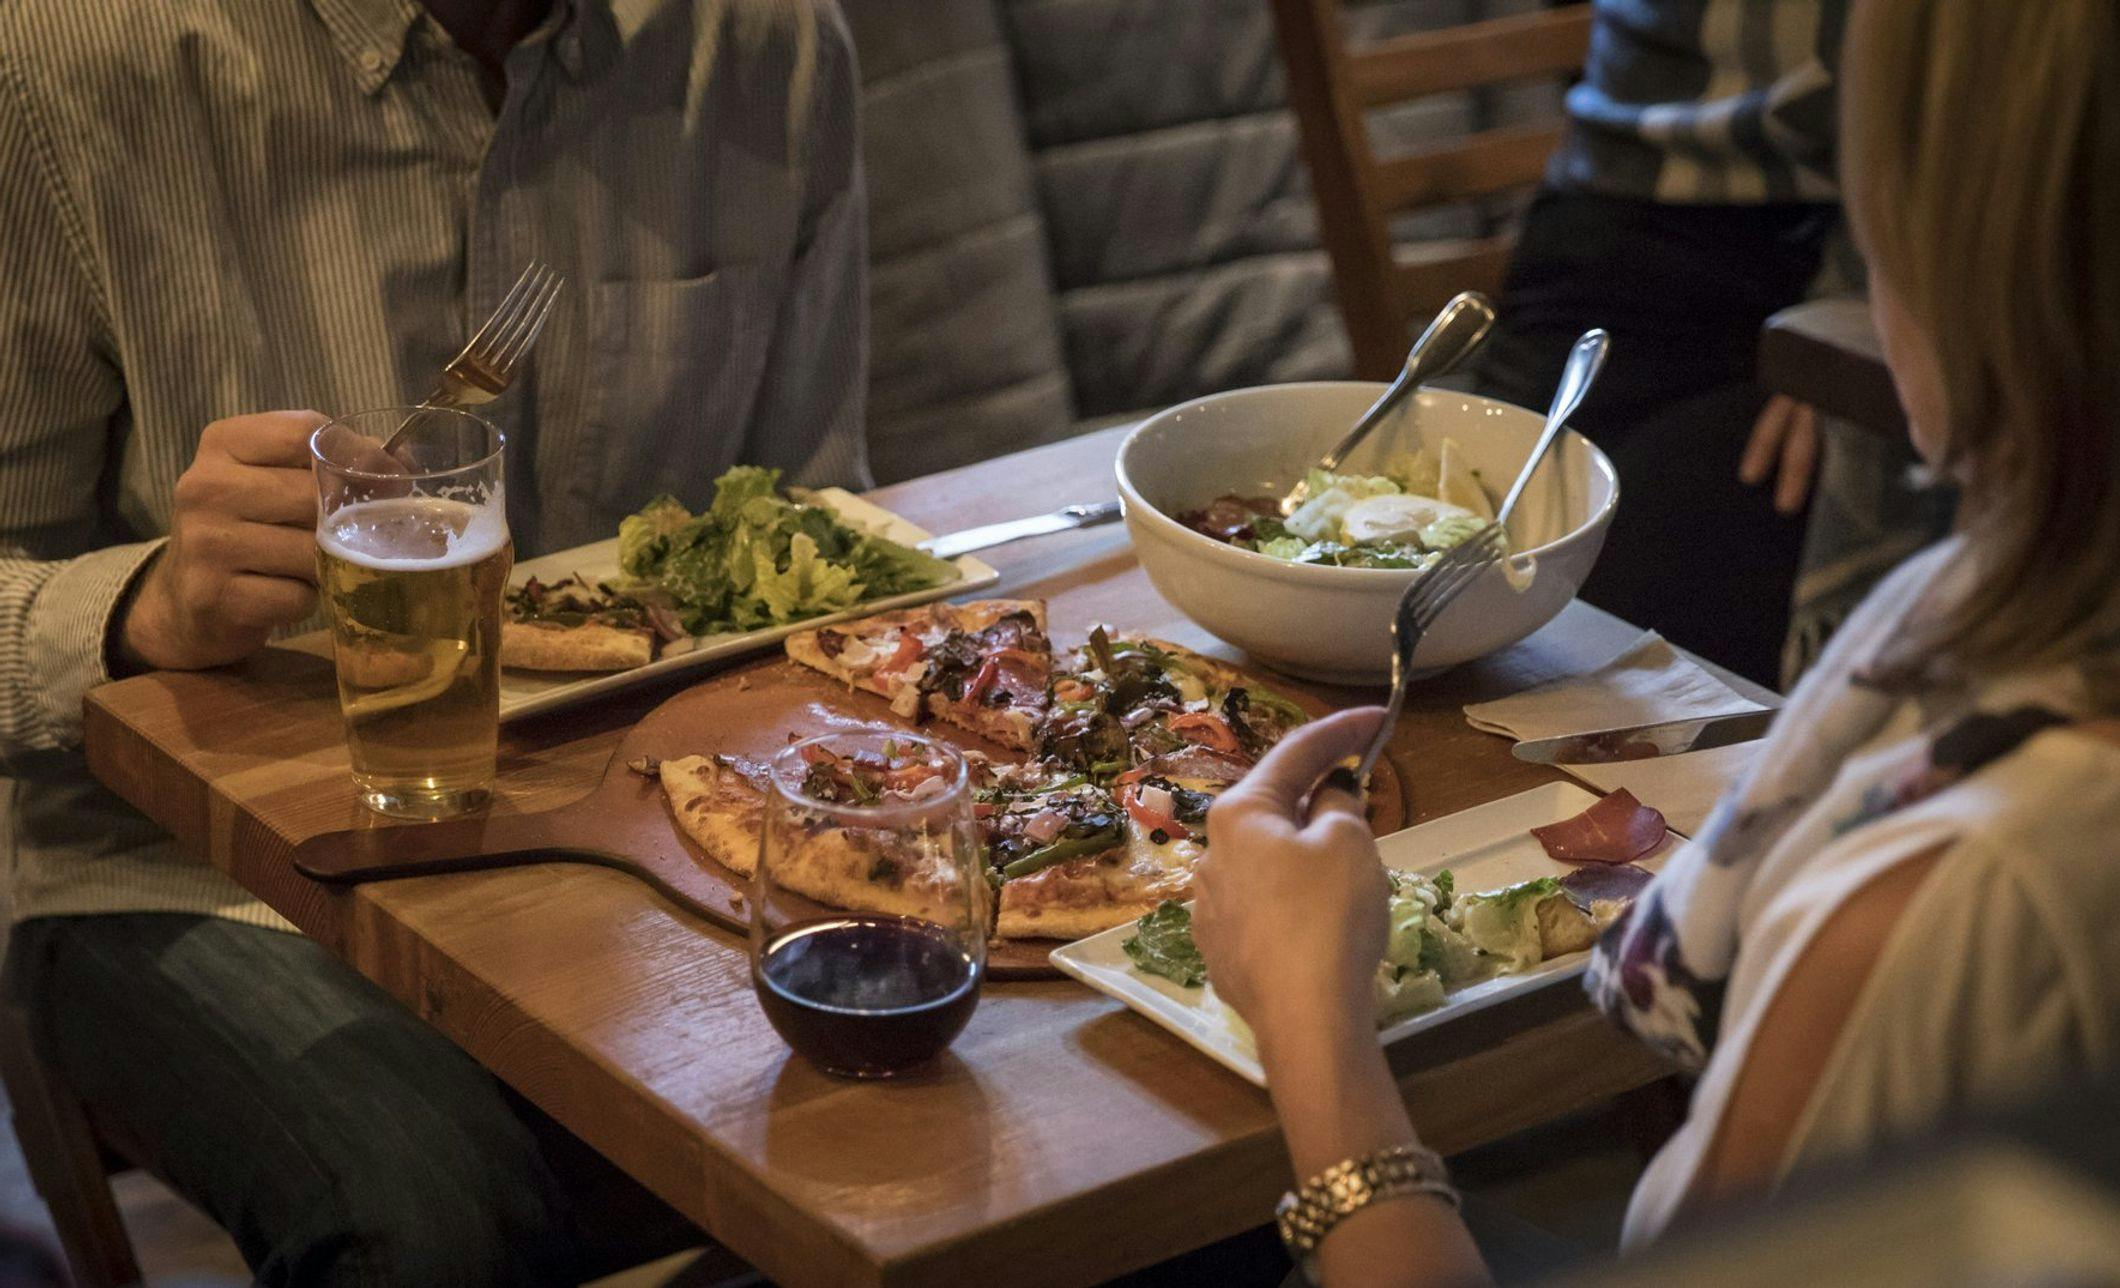 Two people enjoy sharing a meal of pizza and salad with drinks